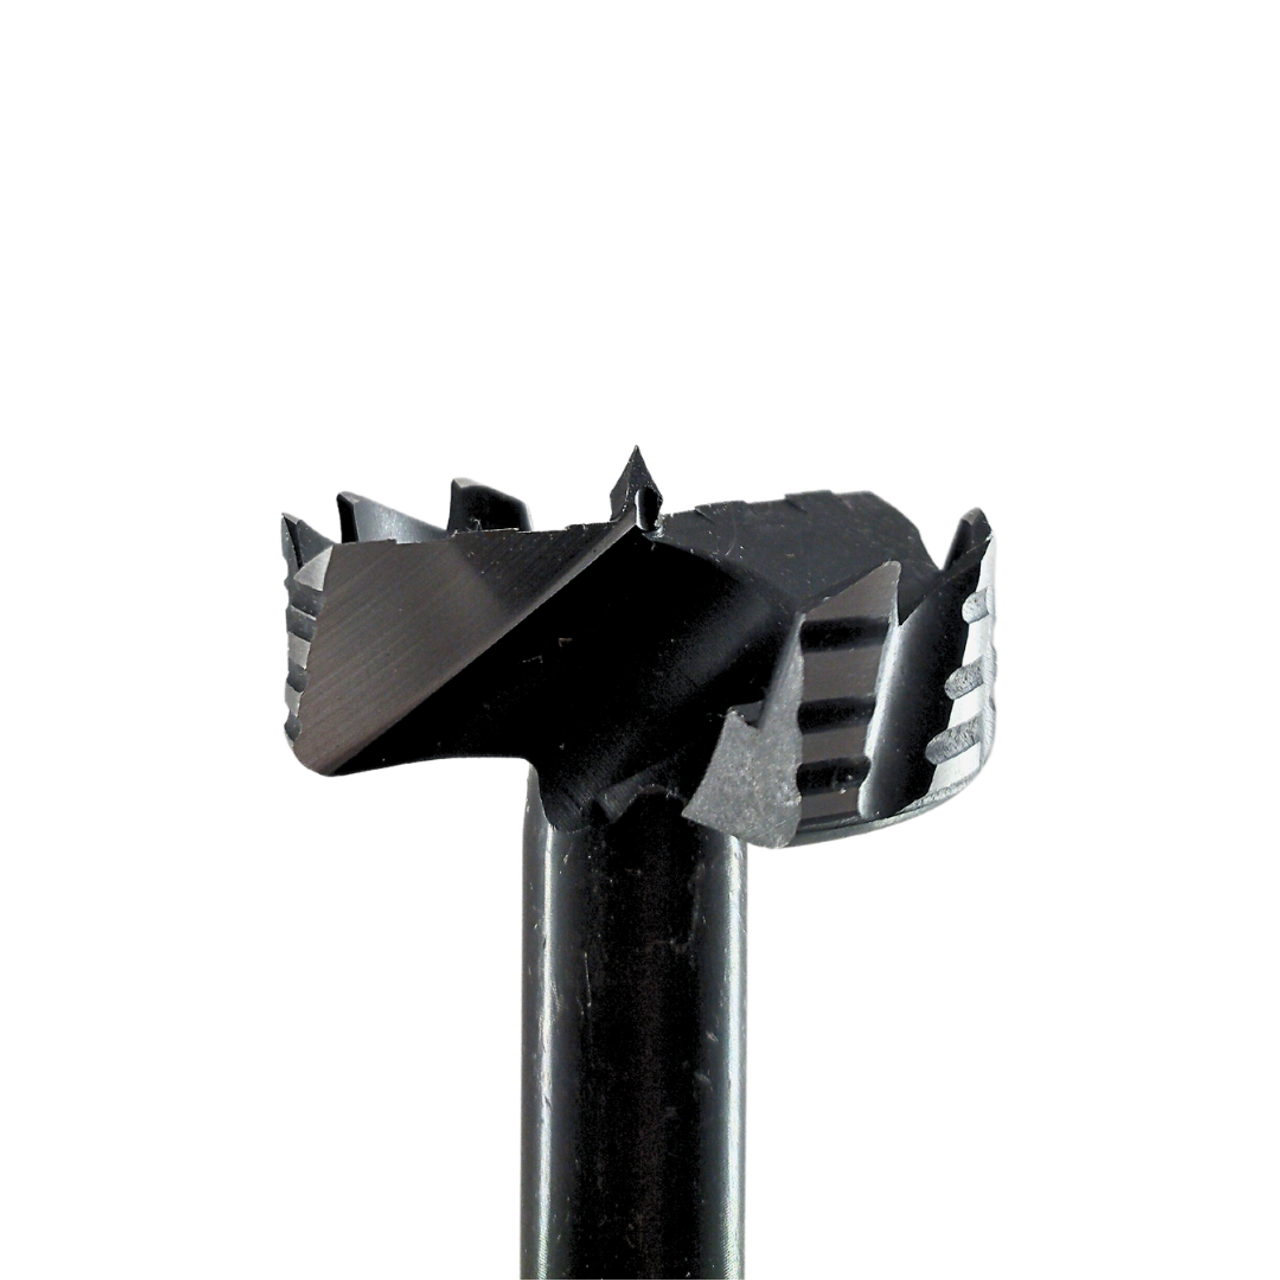 famag bormax forstner bit with centre drill bit for drilling woodworking